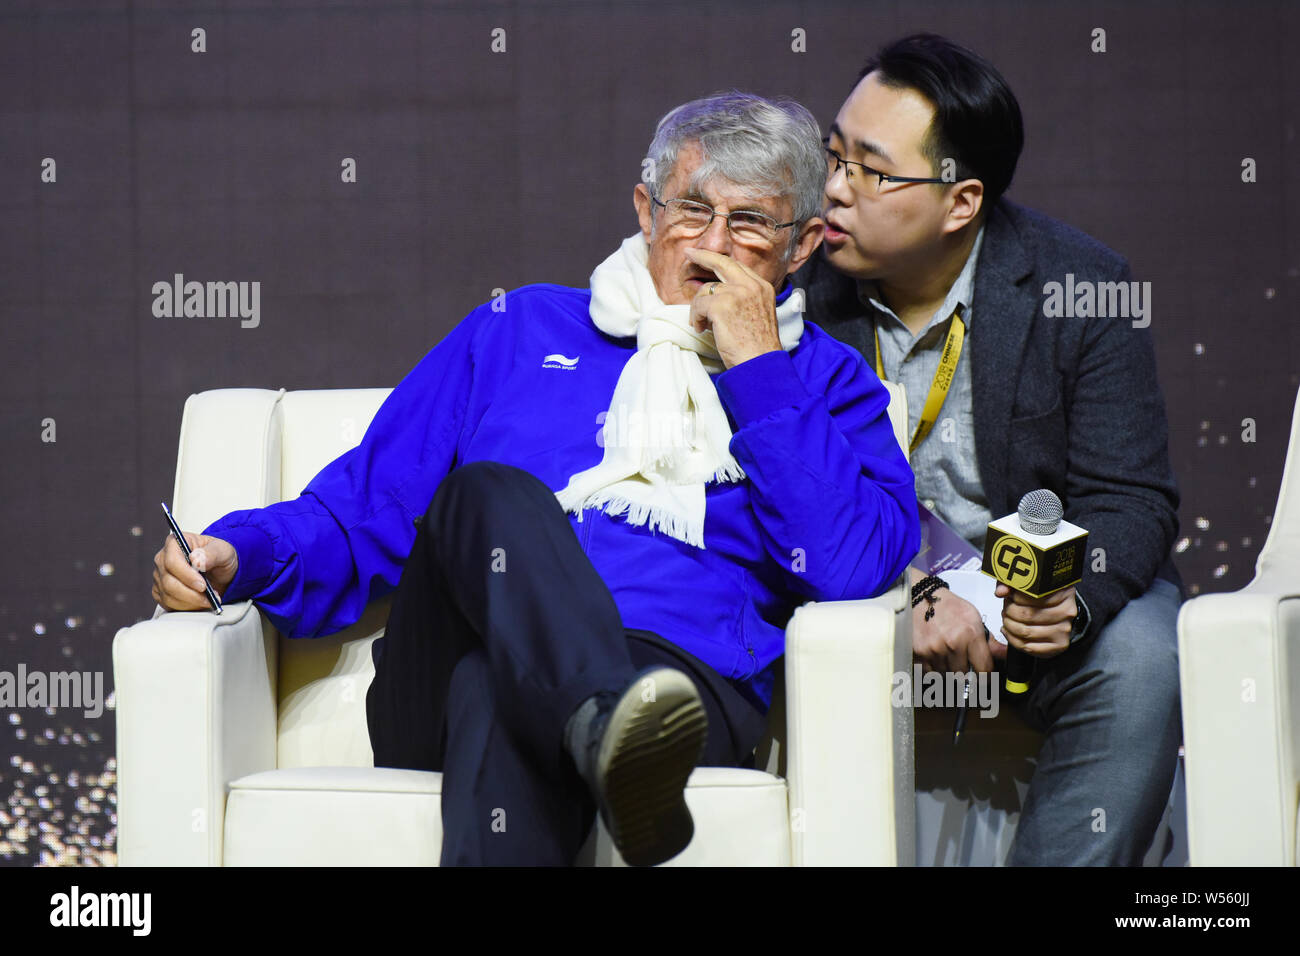 Serbian football coach and former player Bora Milutinovic attends the Chinese Football And Esports Forum during the 2018 Chinese Footballer of the Yea Stock Photo